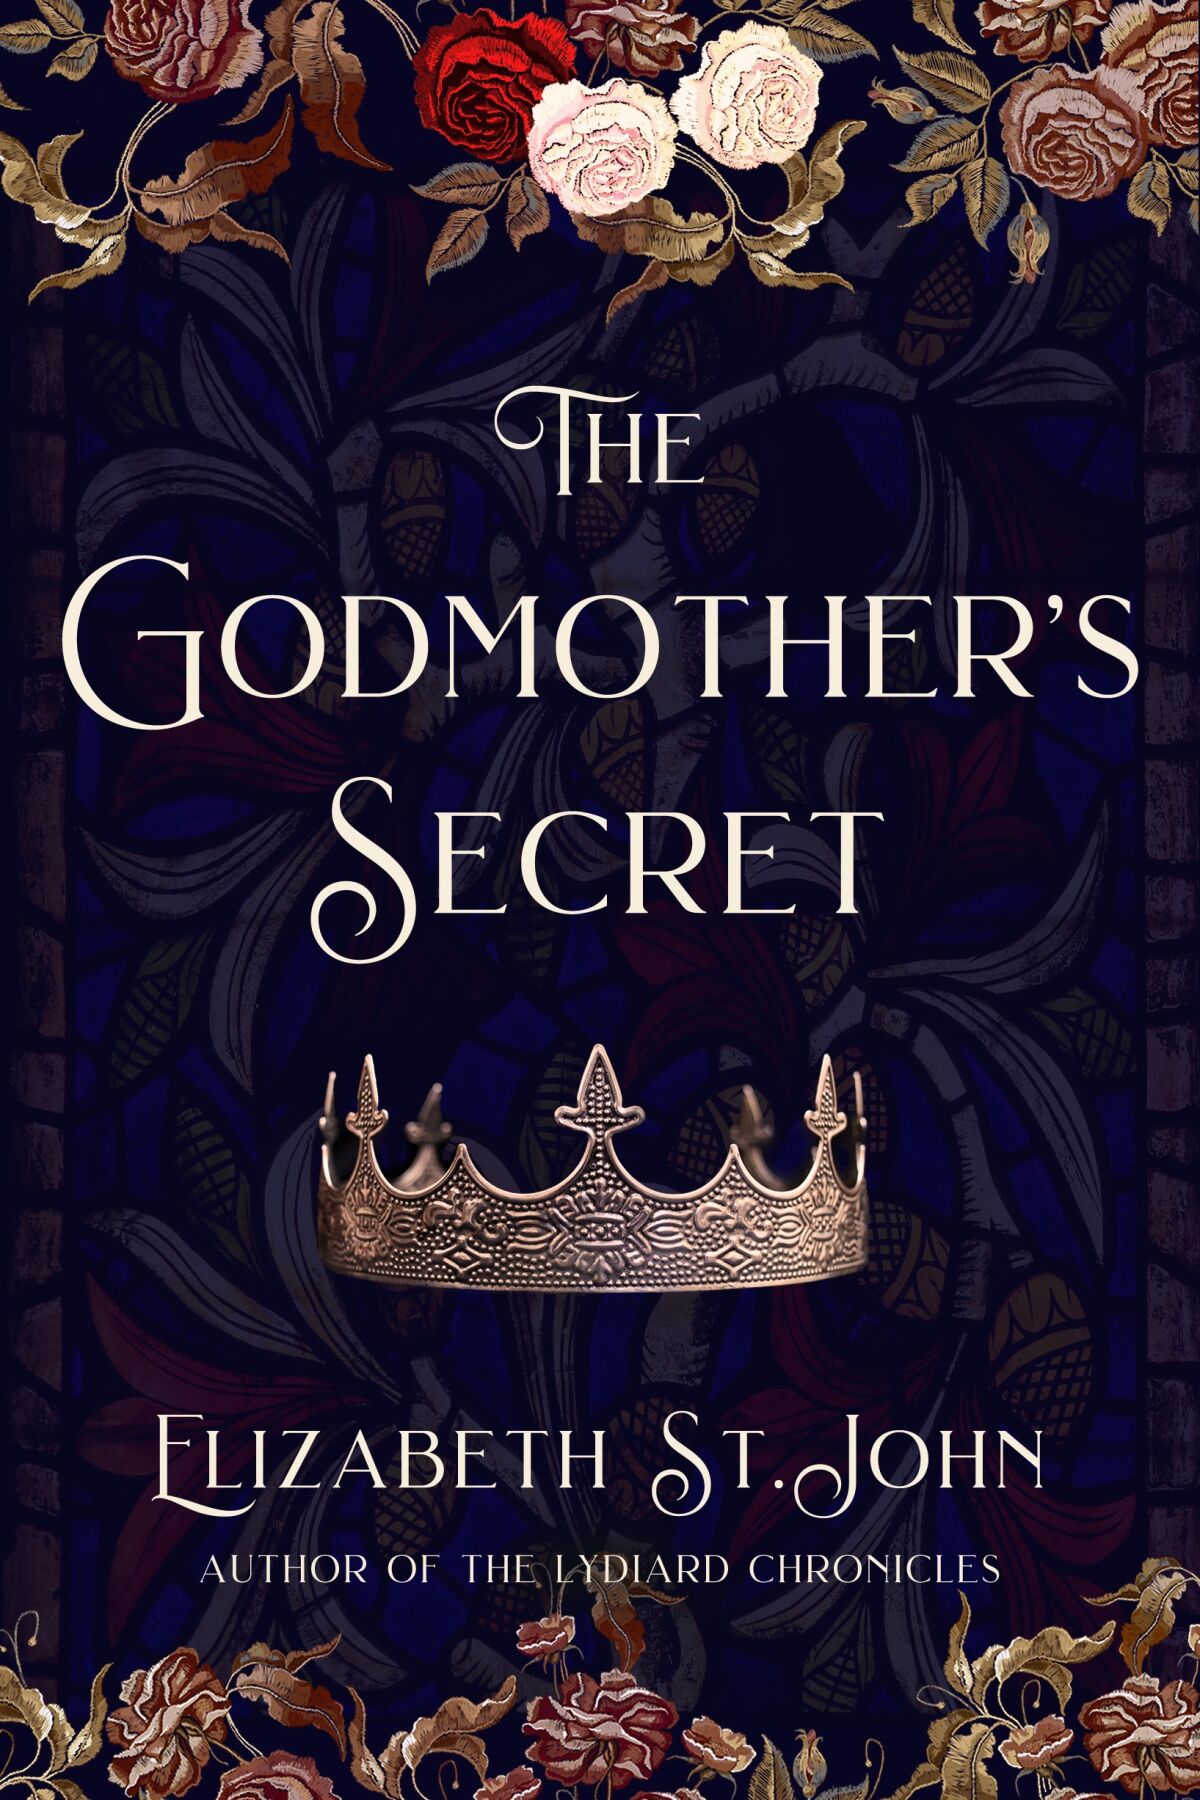 “The Godmother’s Secret” was recently honored as book of the year by the Historical Fiction Company.